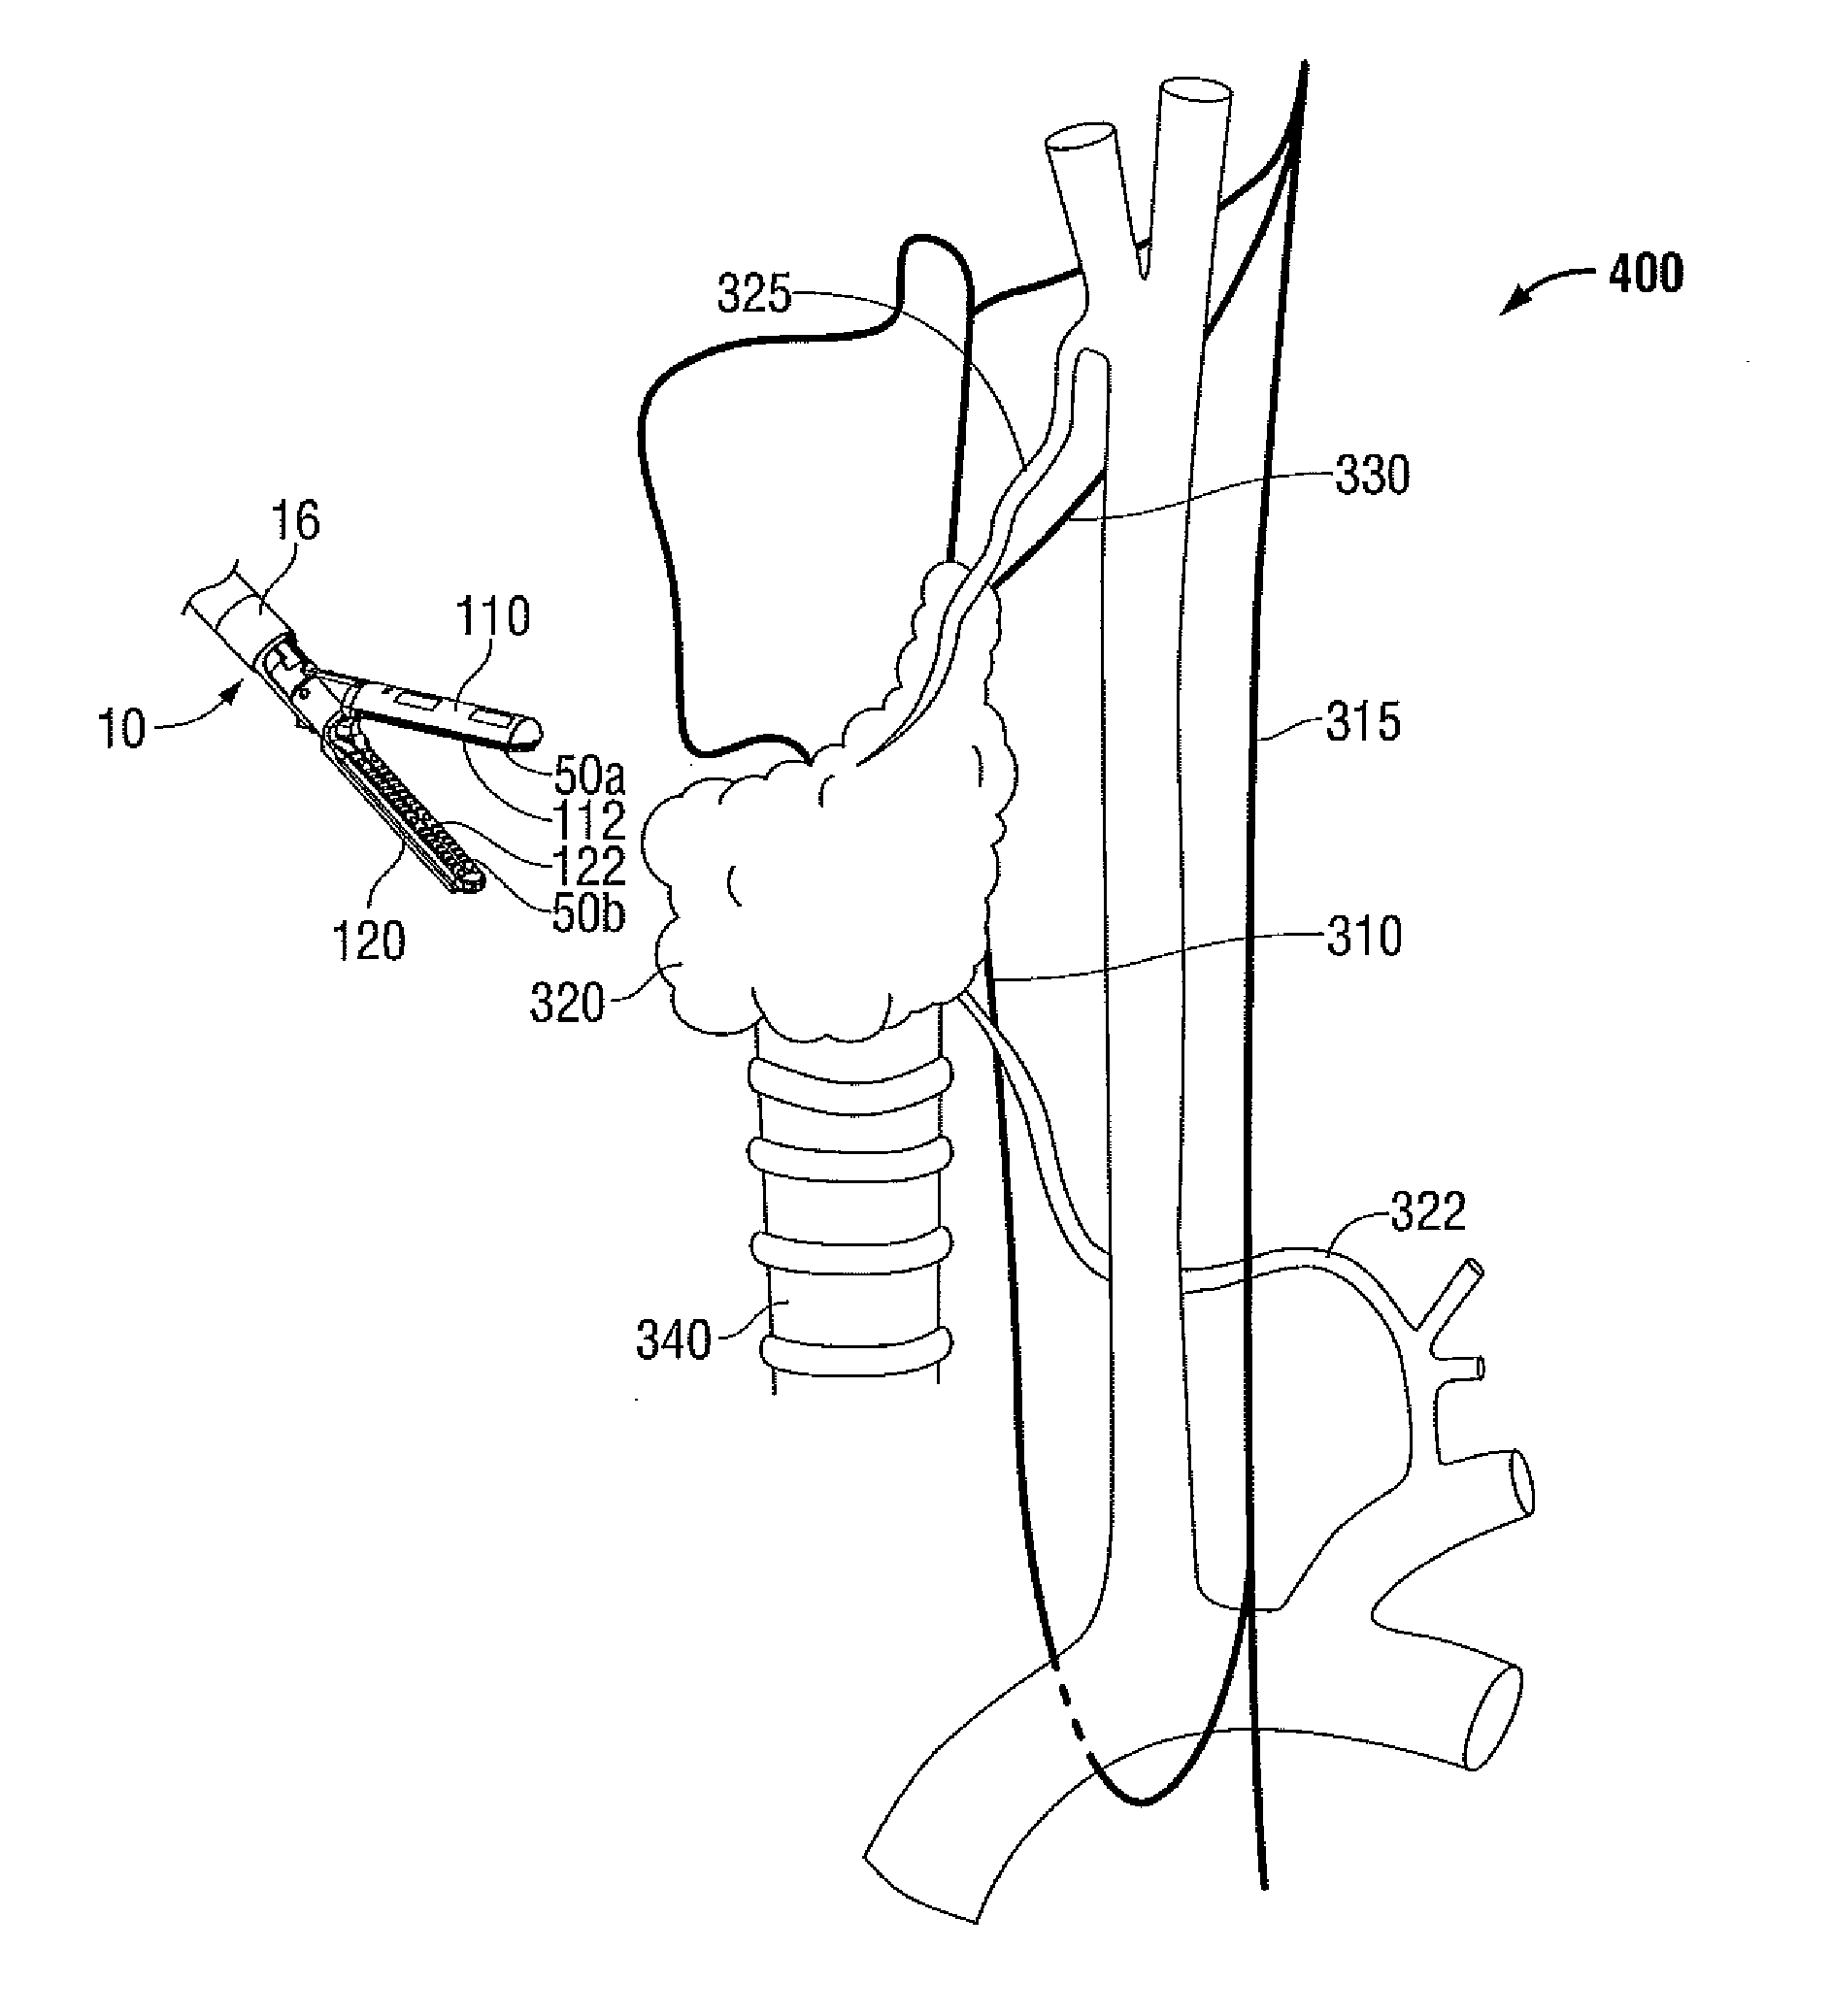 System and Method for Determining Proximity Relative to a Nerve